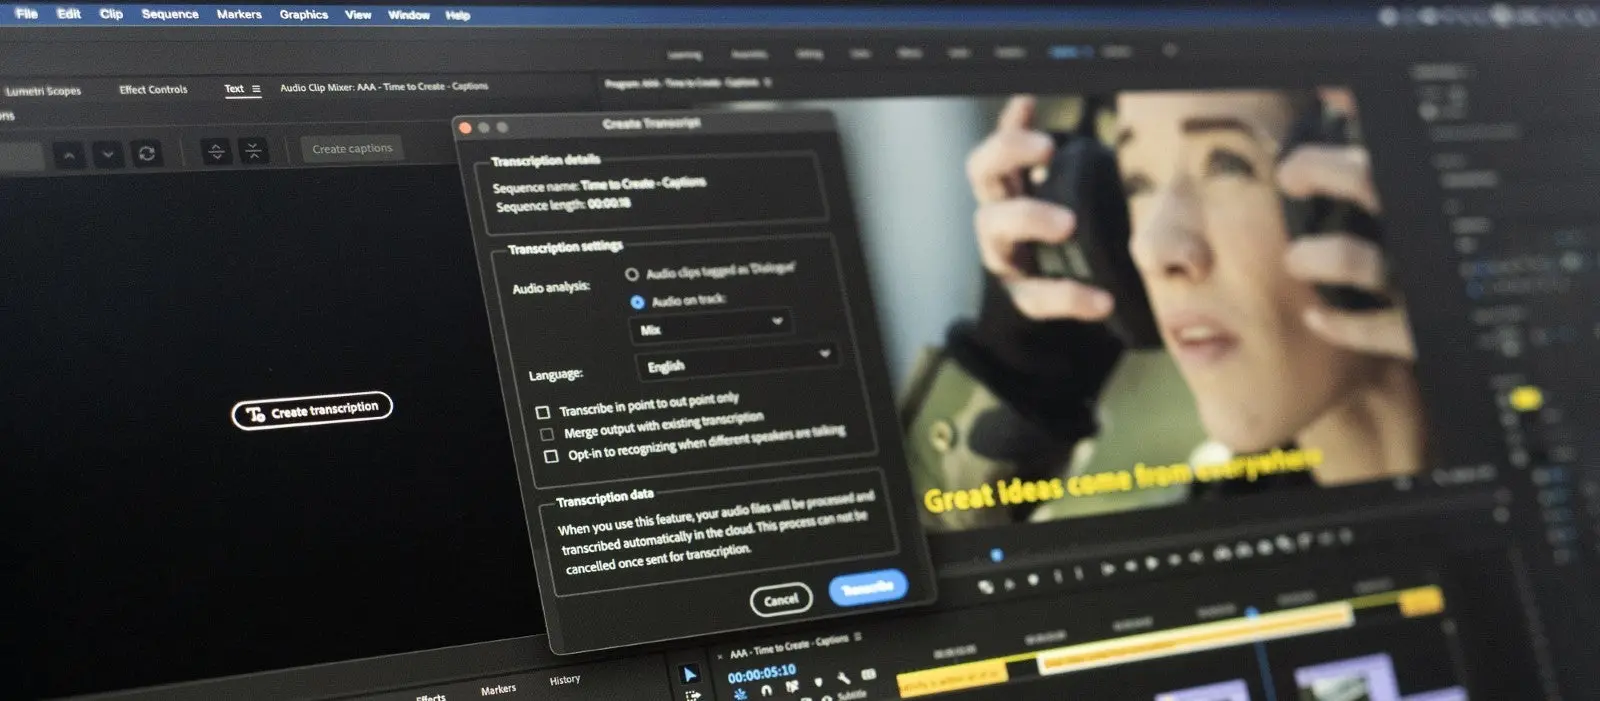 This stylized image shows the Premiere Pro interface with new Speech to Text.